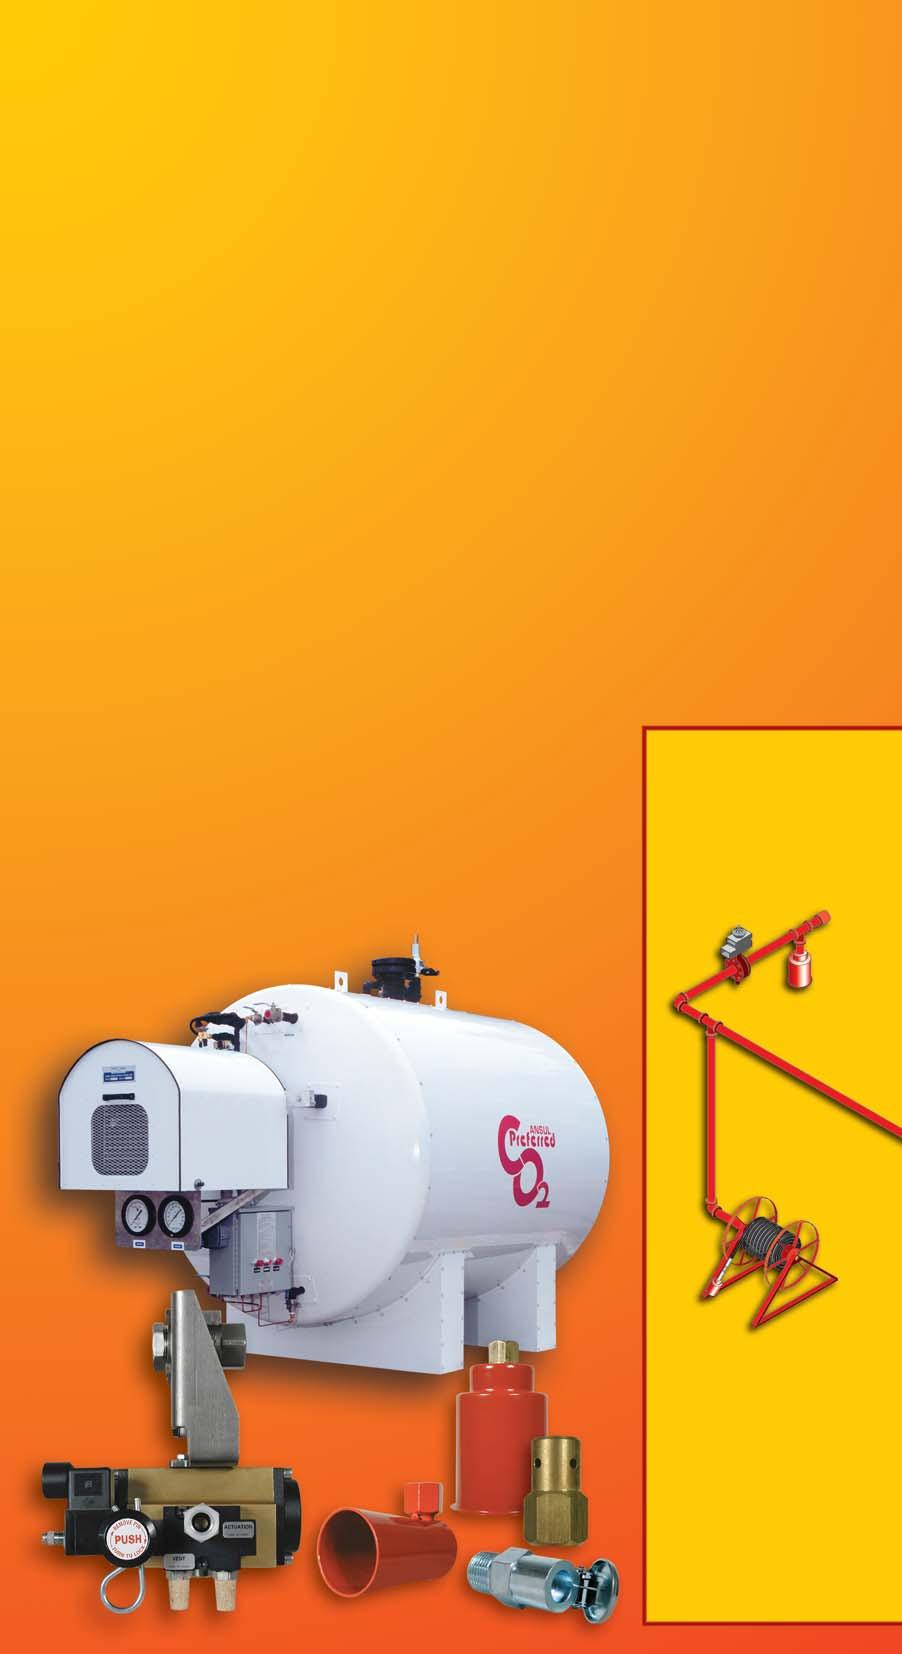 ANSUL PREFERRED Bulk Low Pressure Carbon Dioxide Systems are for fire hazards requiring large amounts of extinguishing agent in a limited amount of space.